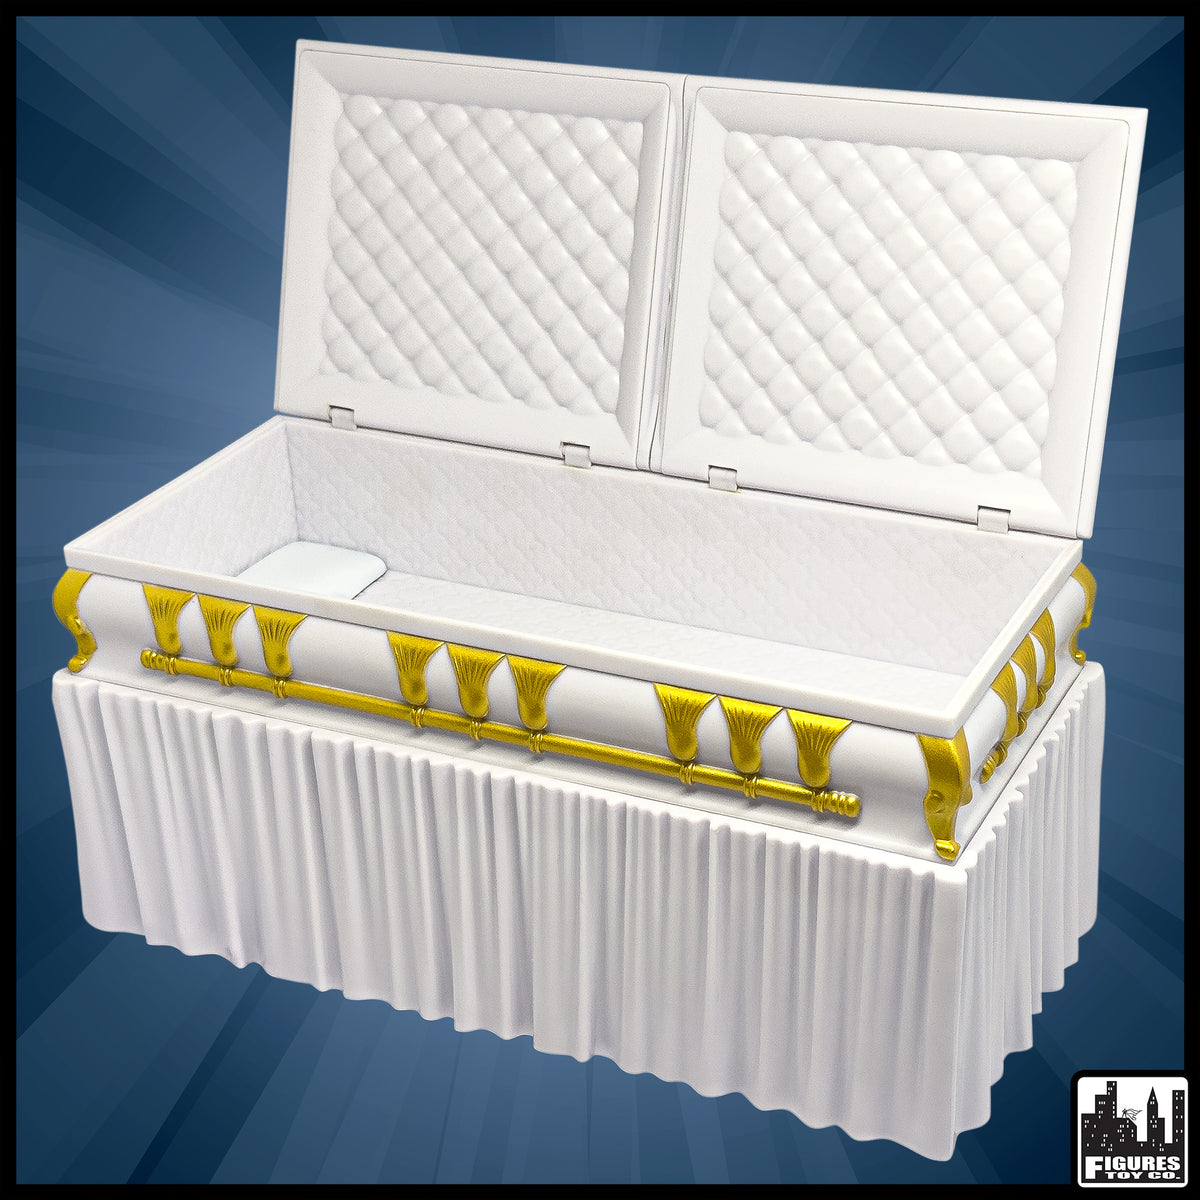 Deluxe White Casket for WWE &amp; AEW Wrestling Action Figures with Removable Base